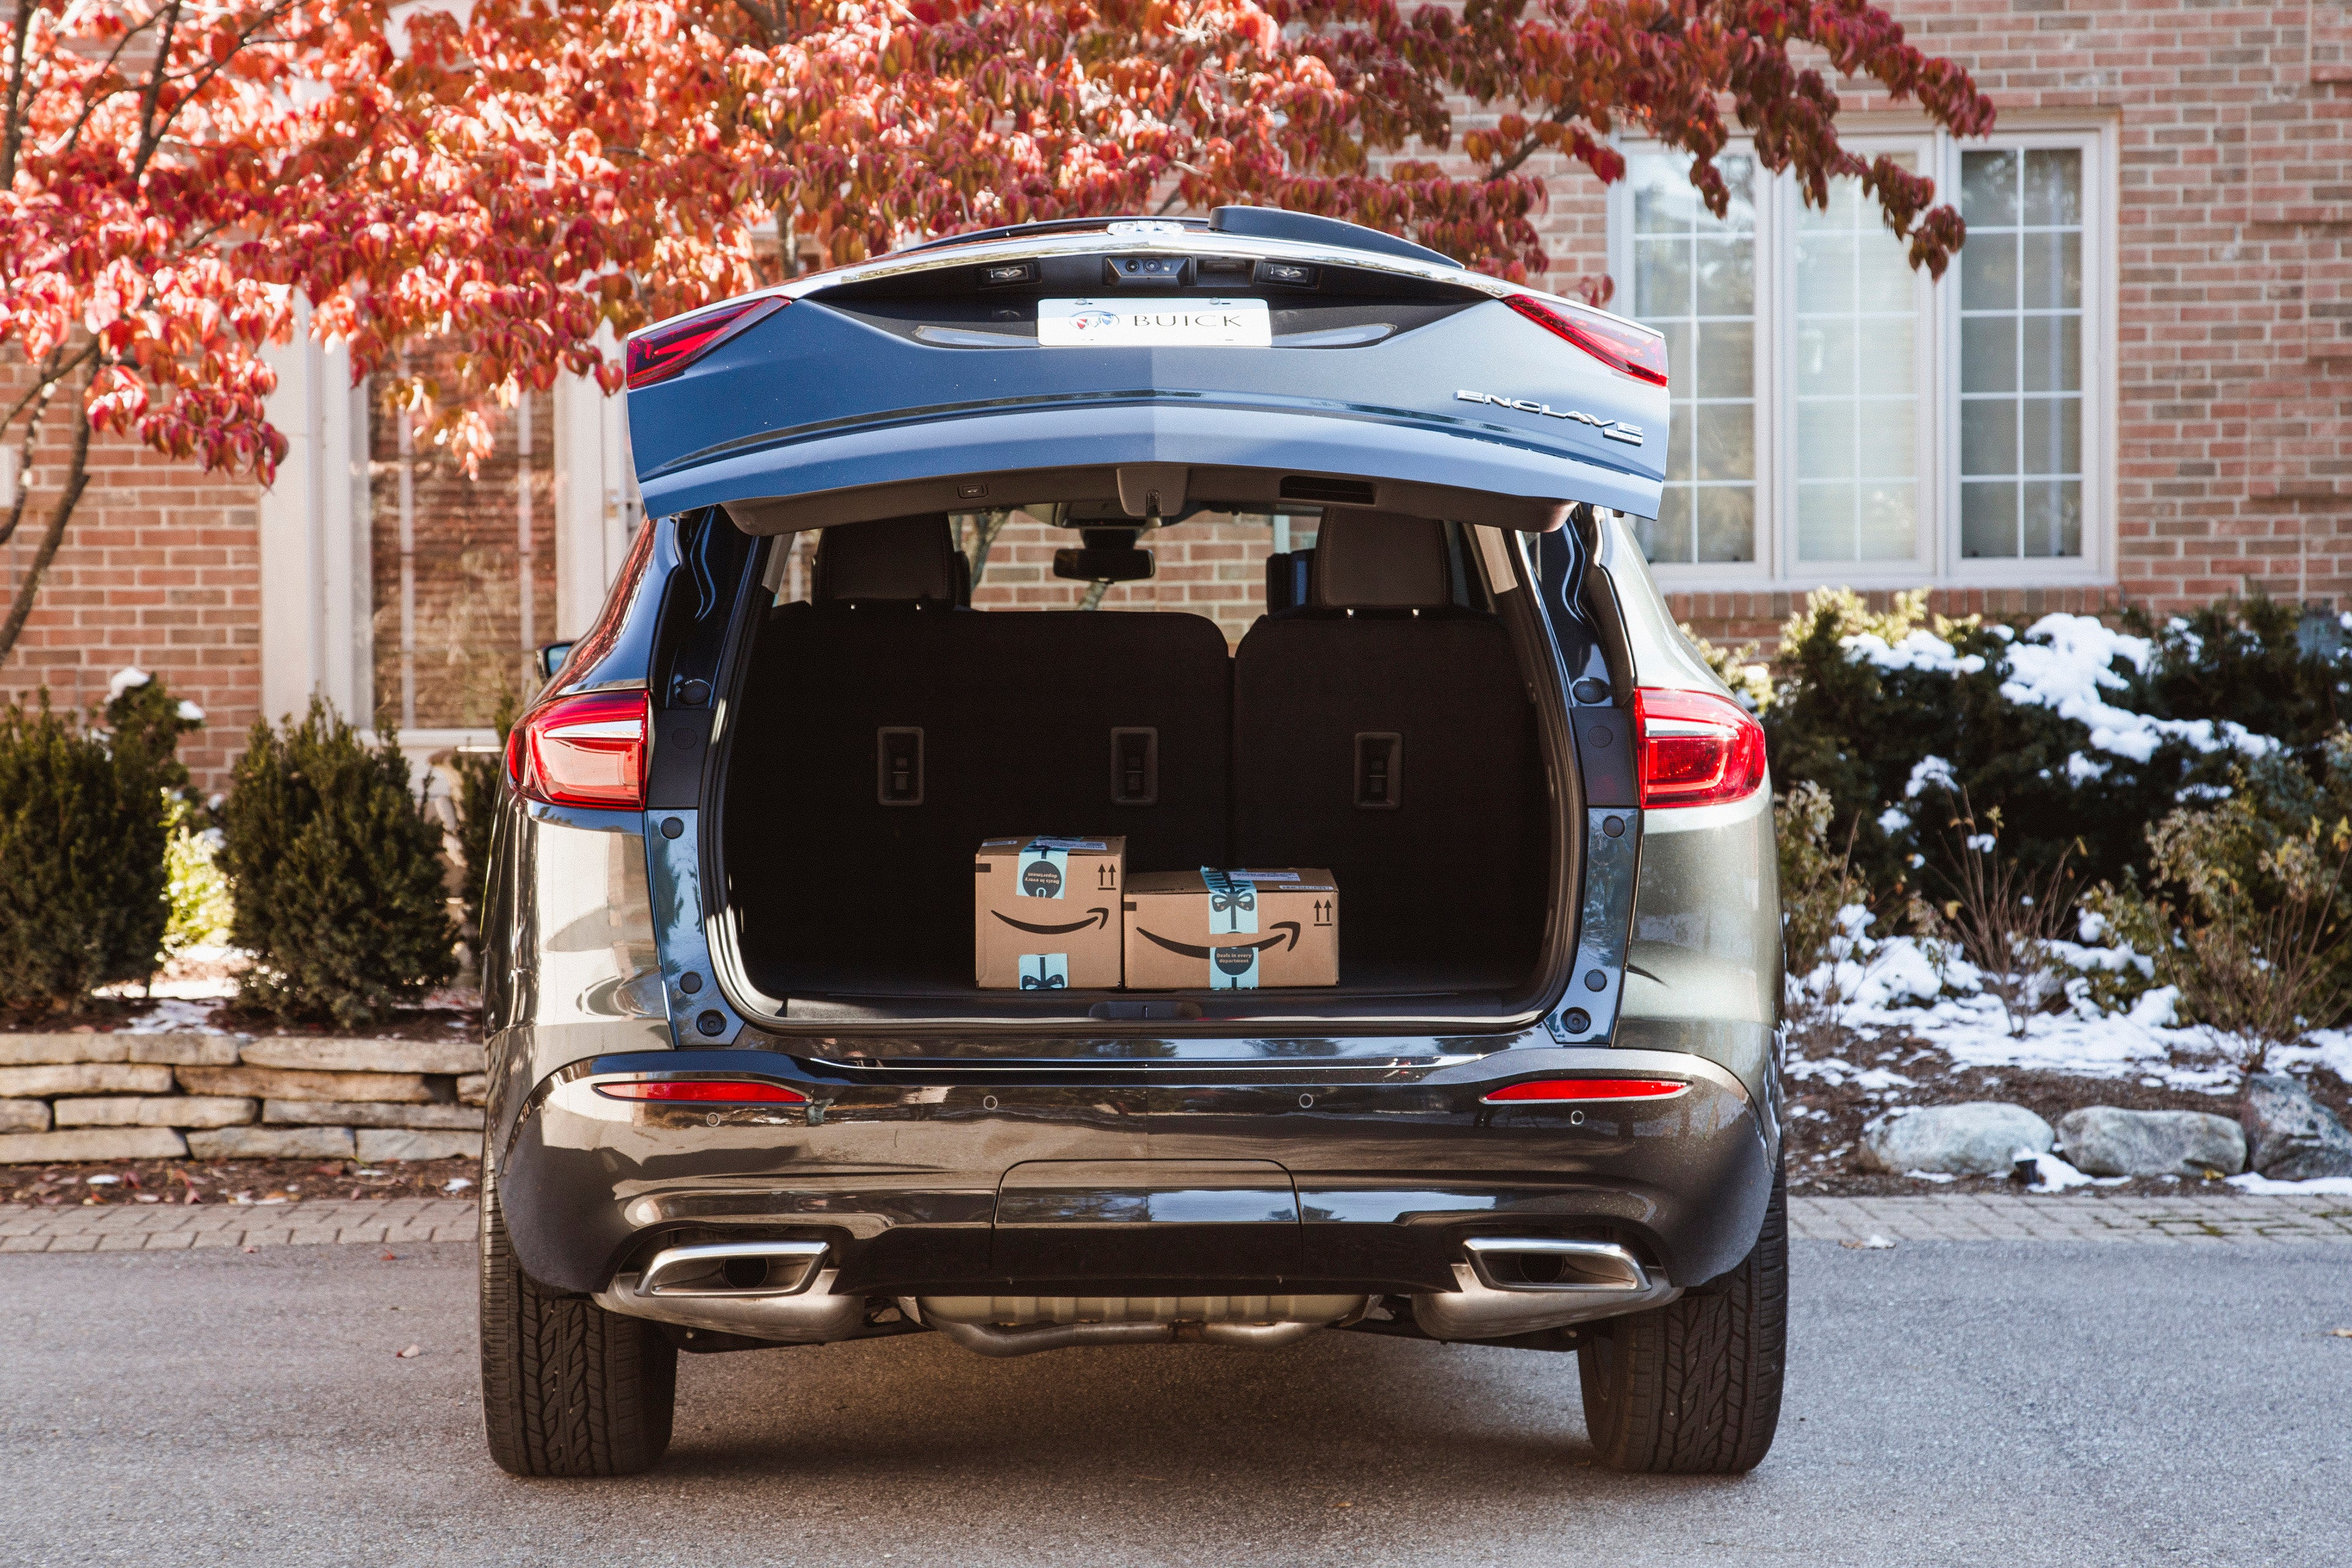 Experience Amazon Key In-Car Delivery with the new Buick Enclave